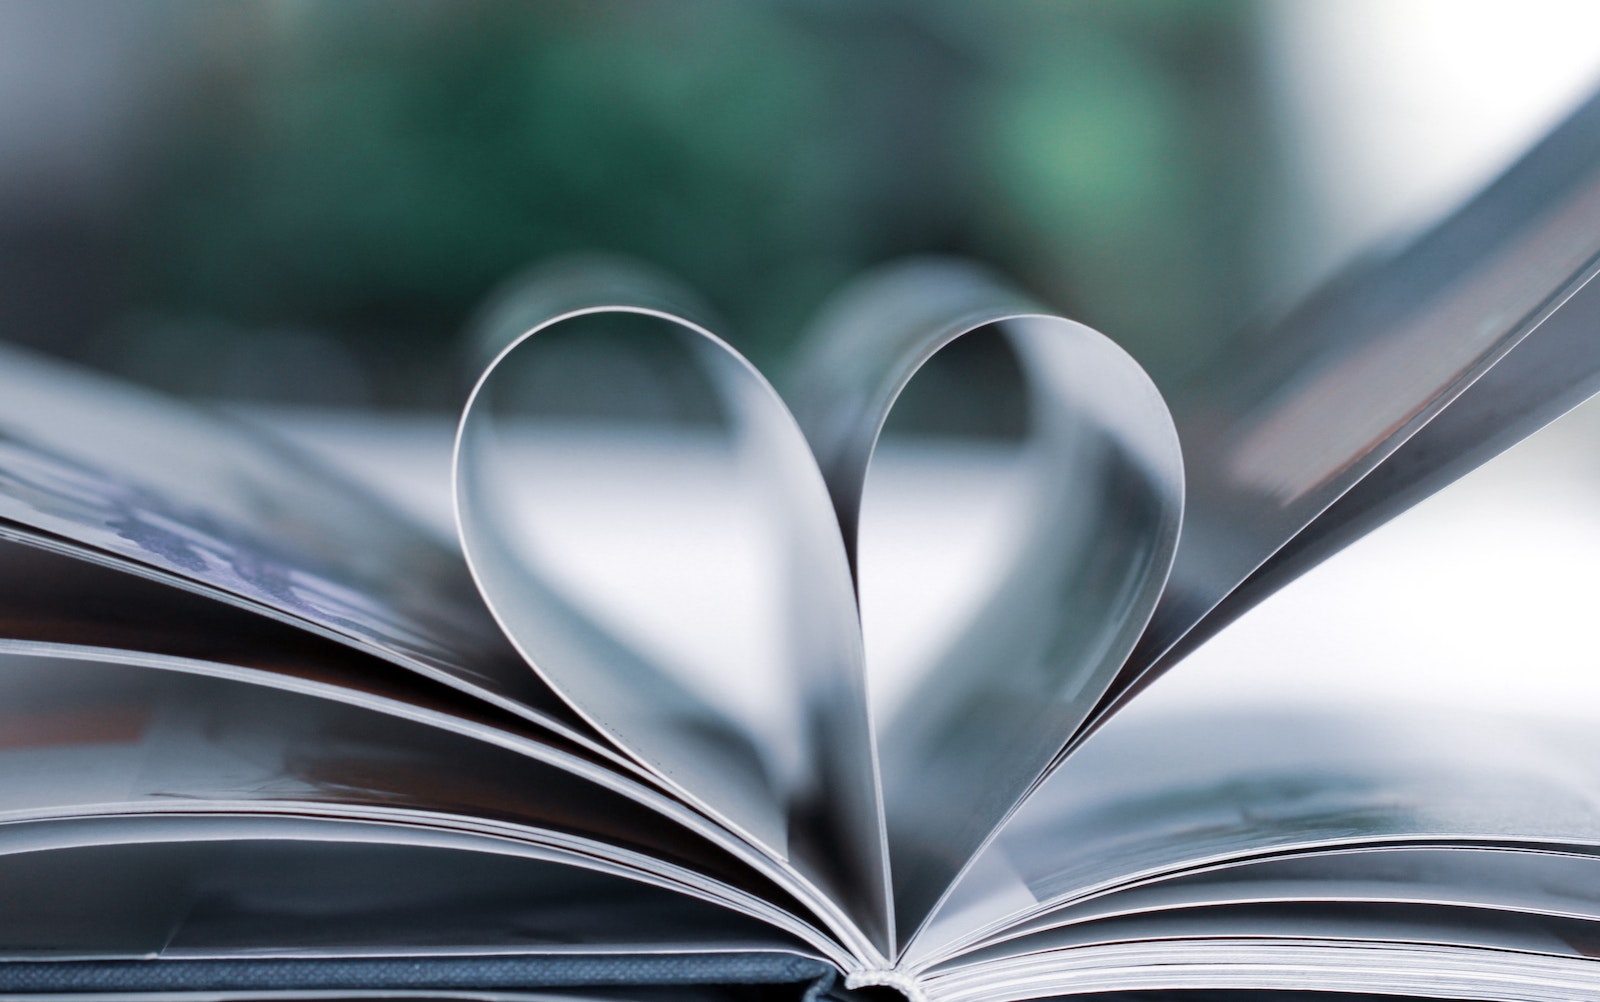 pages of a book creating a heart shape